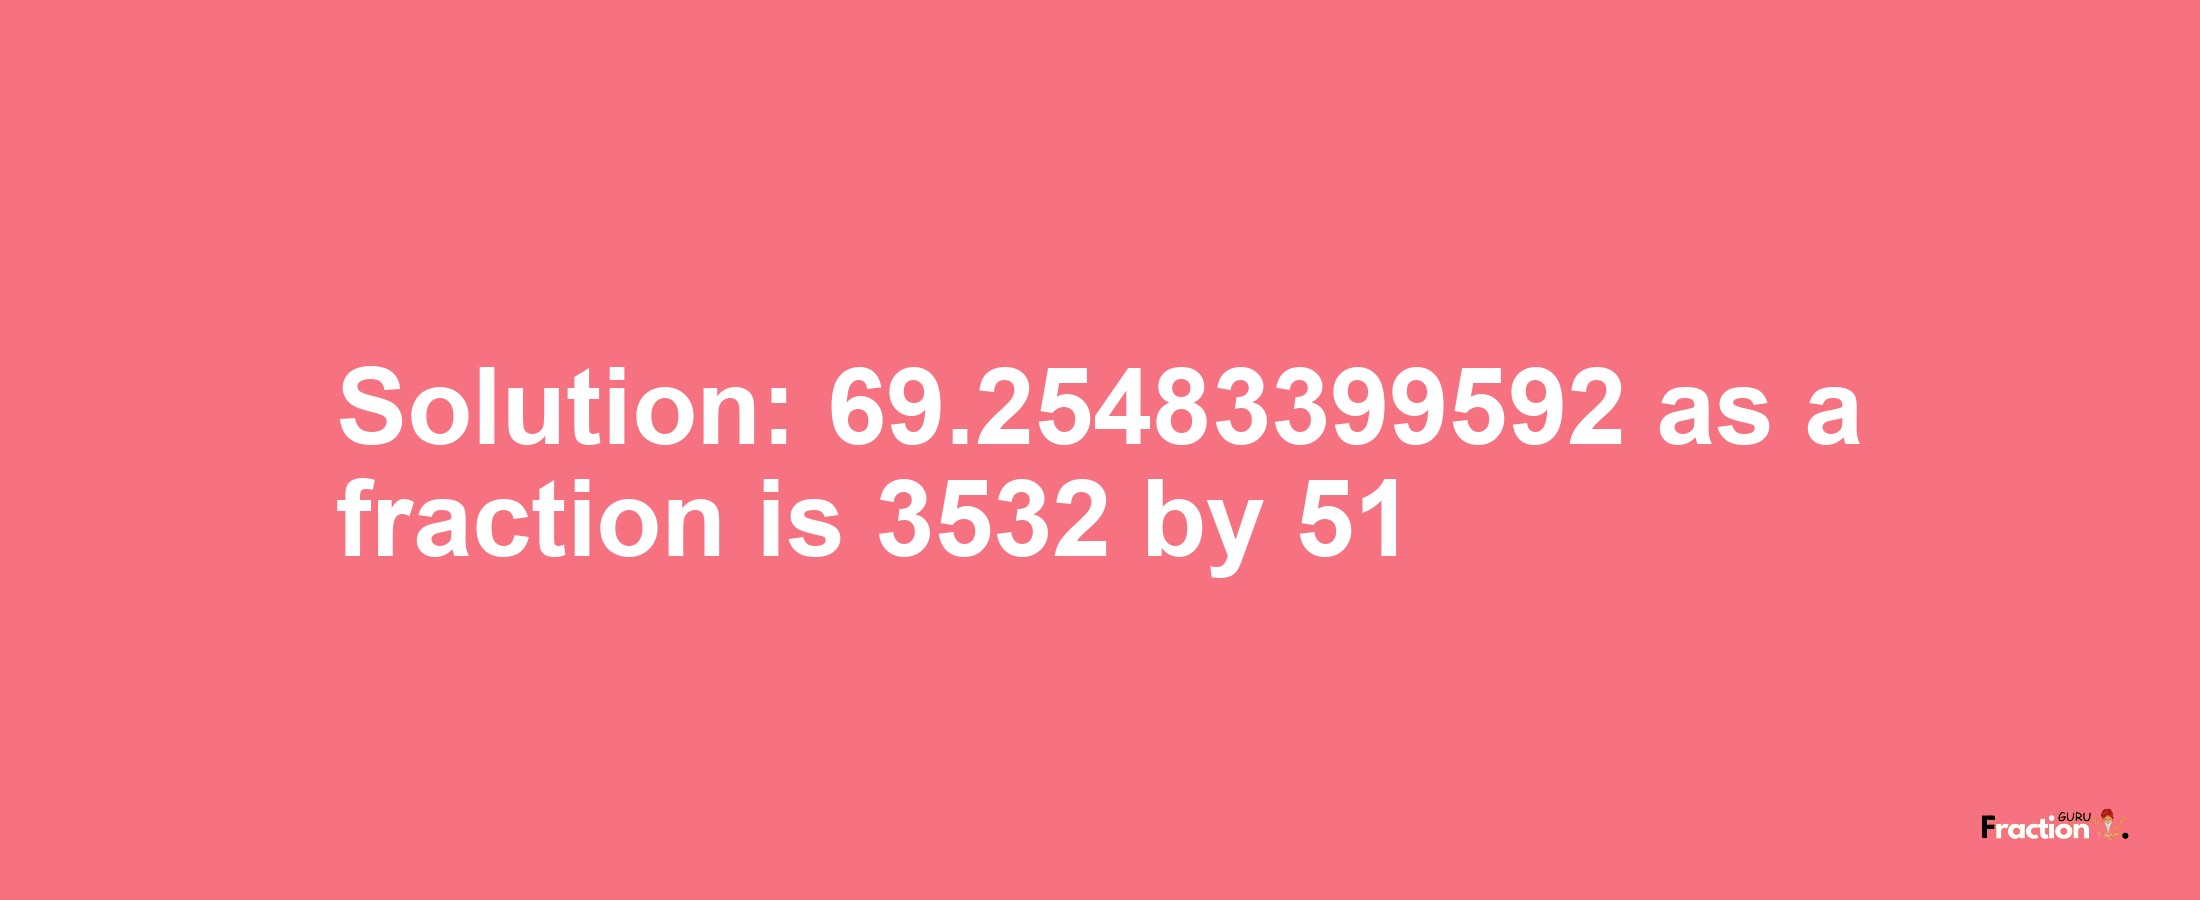 Solution:69.25483399592 as a fraction is 3532/51